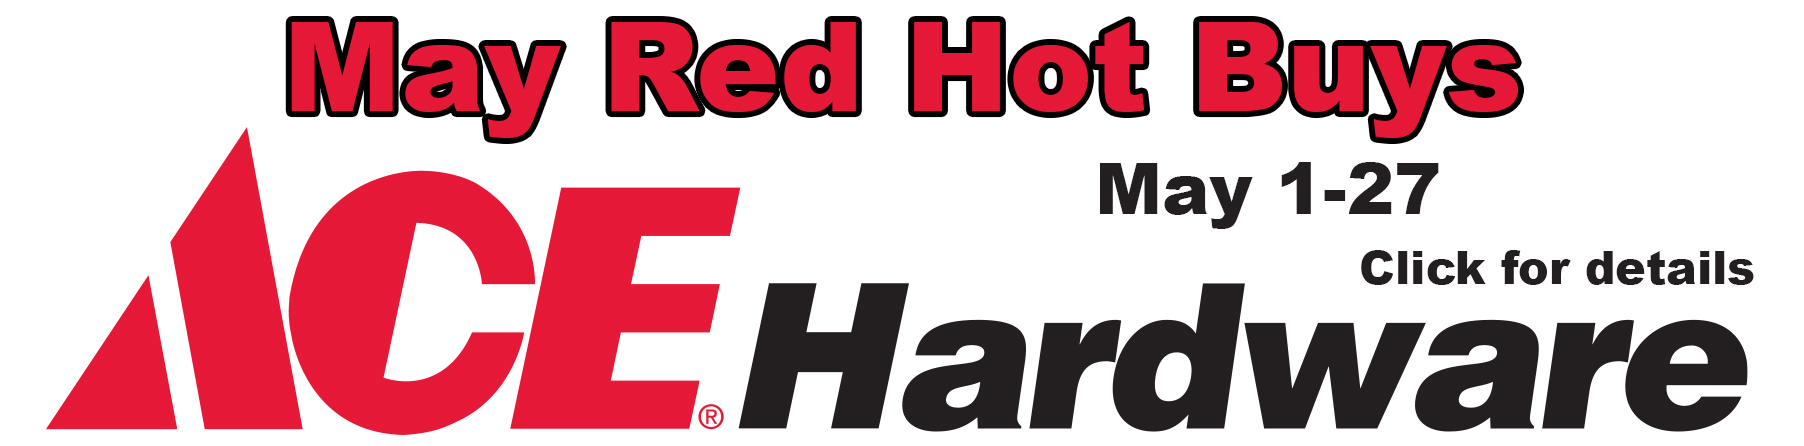 Poulsen Ace Hardware May Red Hot Buys